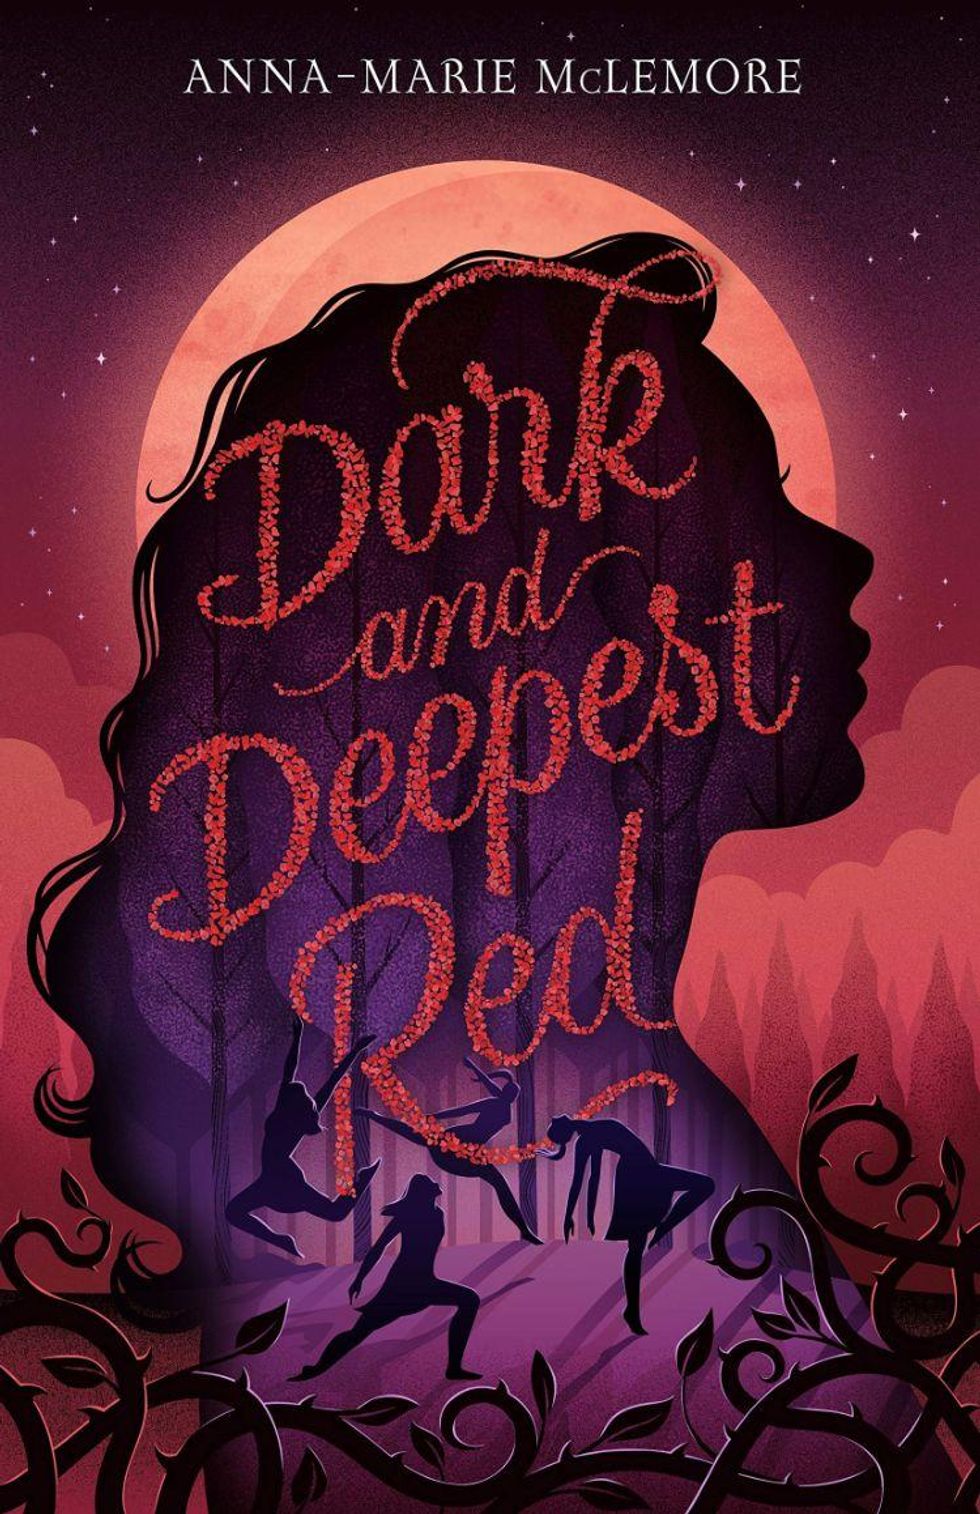 dark-ands-deepest-red.jpg